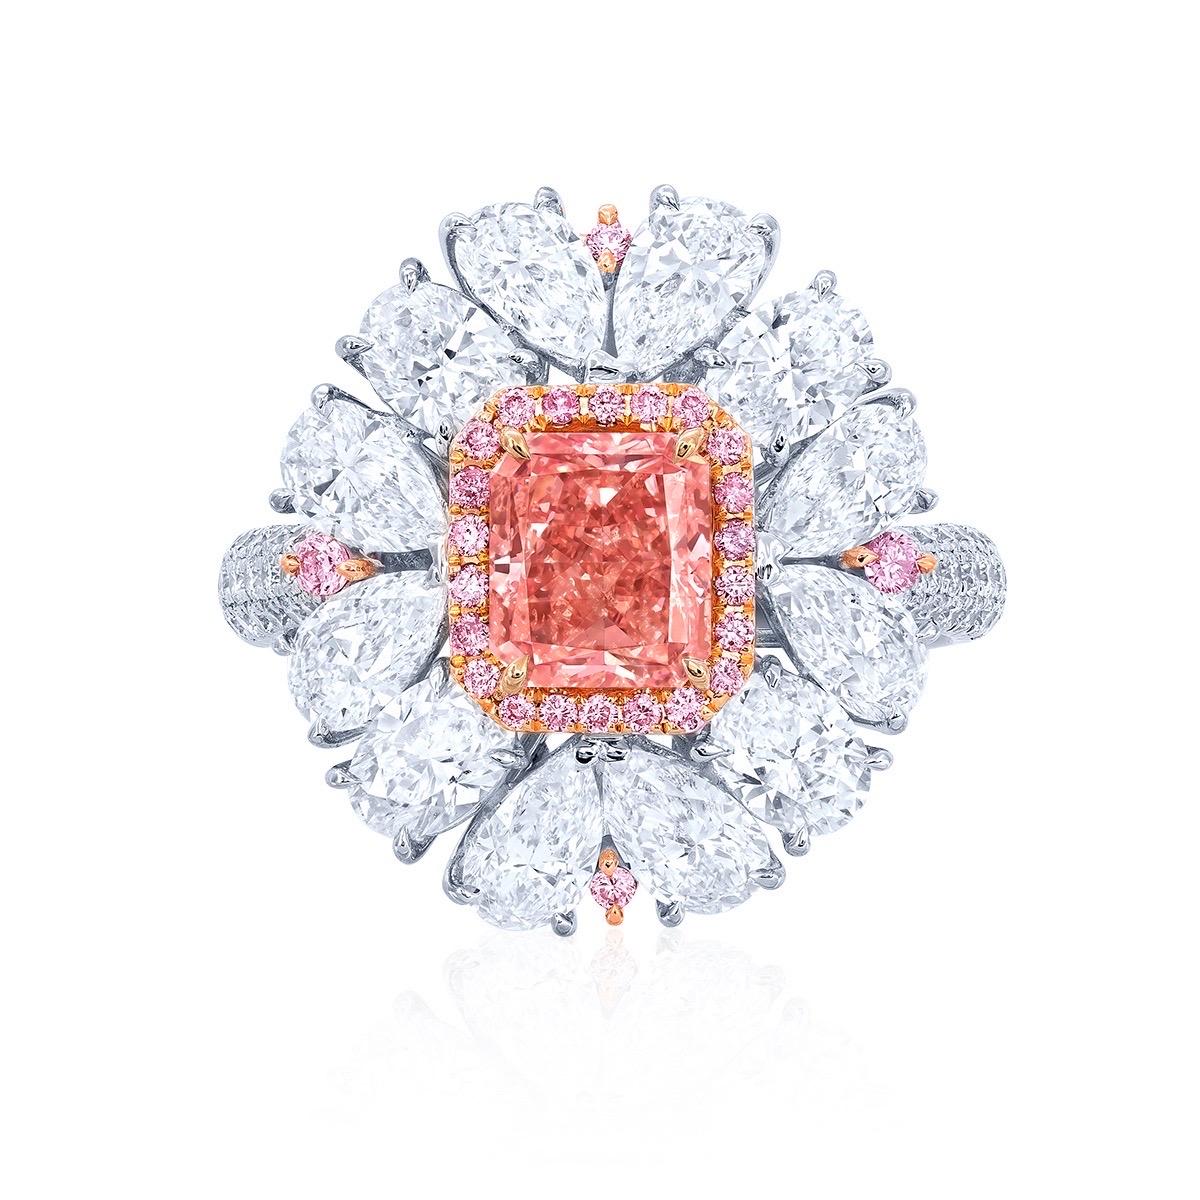 From the Museum Vault at Emilio Jewelry located on New York's iconic Fifth Avenue,
Another true investment/collectors piece. 
Center Stone: just over 1.20ct  
Setting: 58 white diamonds totaling about 0.39 carats, 26 pink diamonds totaling about